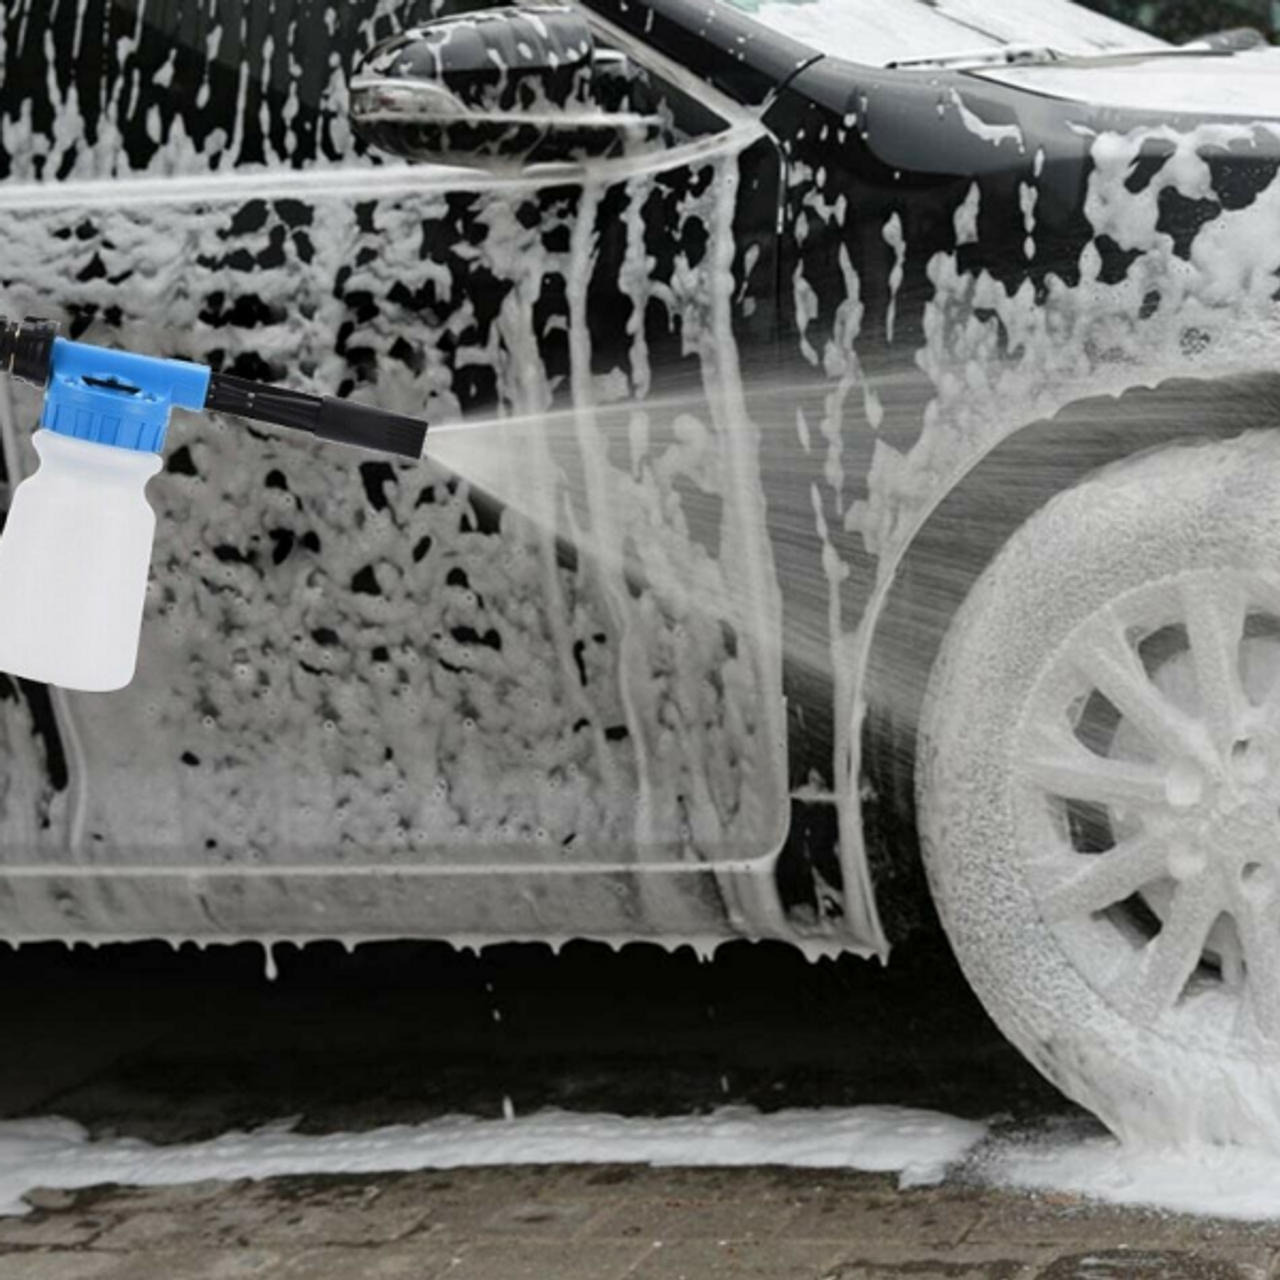 Carwash Cannon Soap Foam Blaster Nozzle Spray Gun, Just spray and rinse, No  More Scrubbing, Just spray and rinse, Car wash system features  revolutionary foam blasting technology to washing your Car 